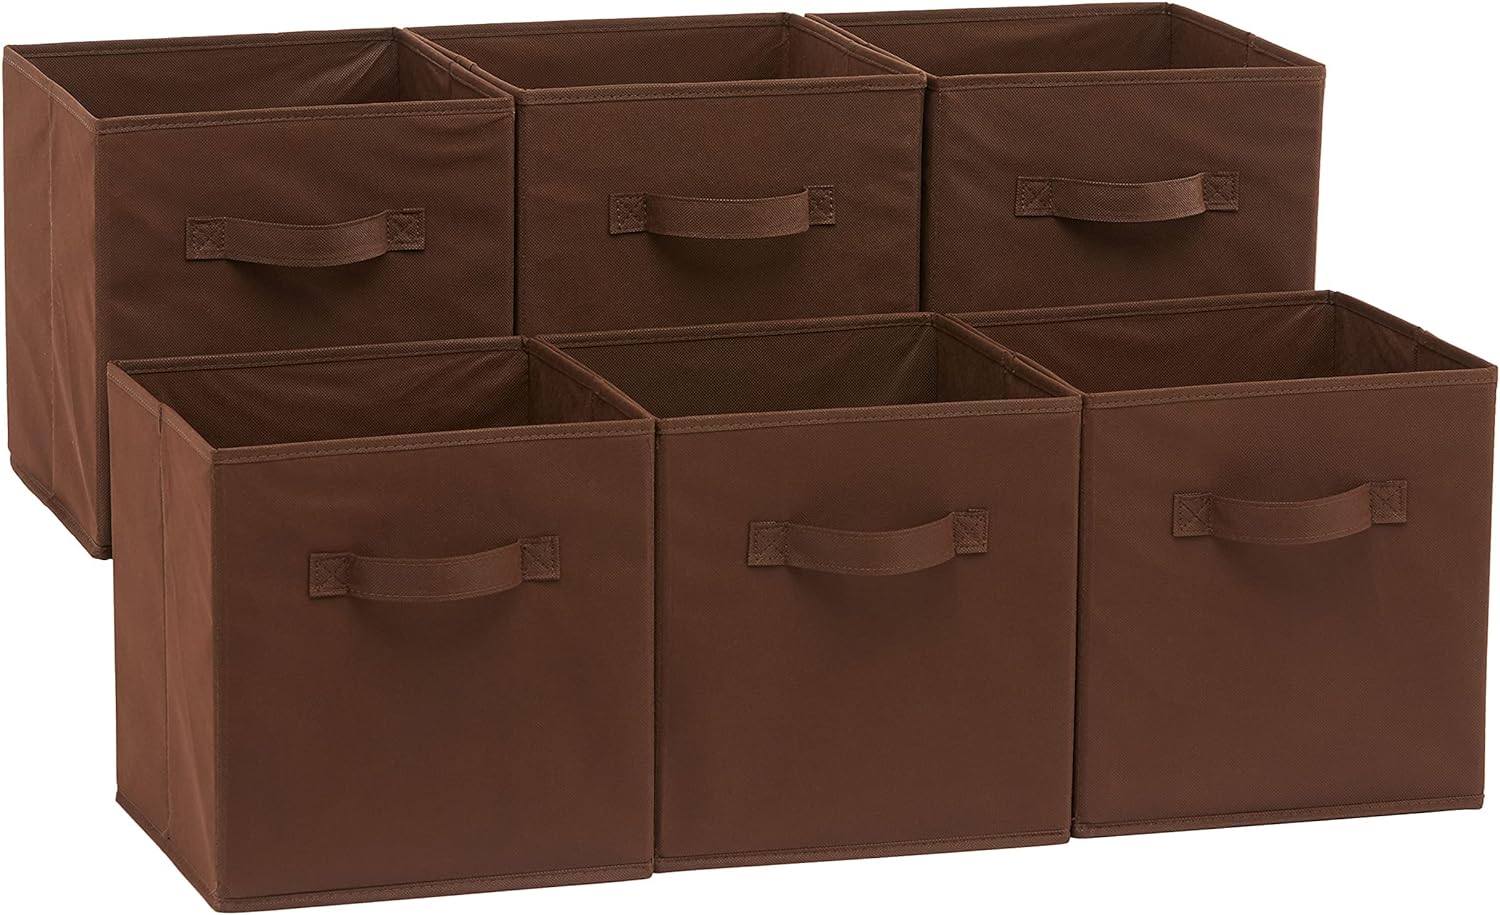 Amazon Basics Collapsible Fabric Storage Cubes Organizer with Handles, 10.5x10.5x11, Brown - Pack of 6